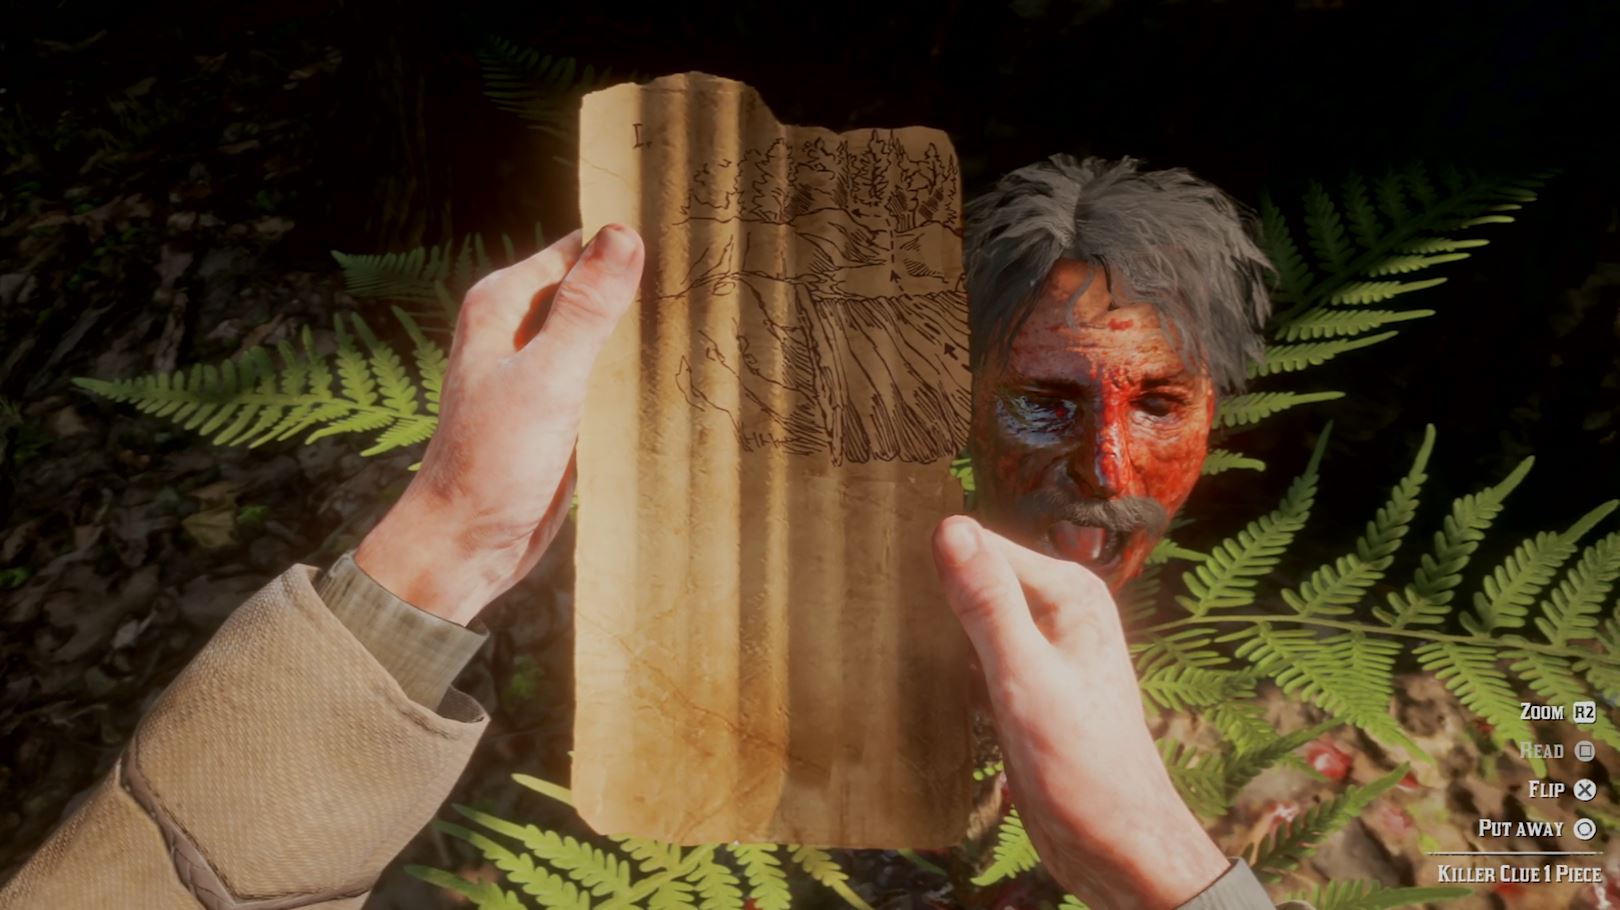 How To Solve The Red Dead Redemption 2 Killer Clue Mystery